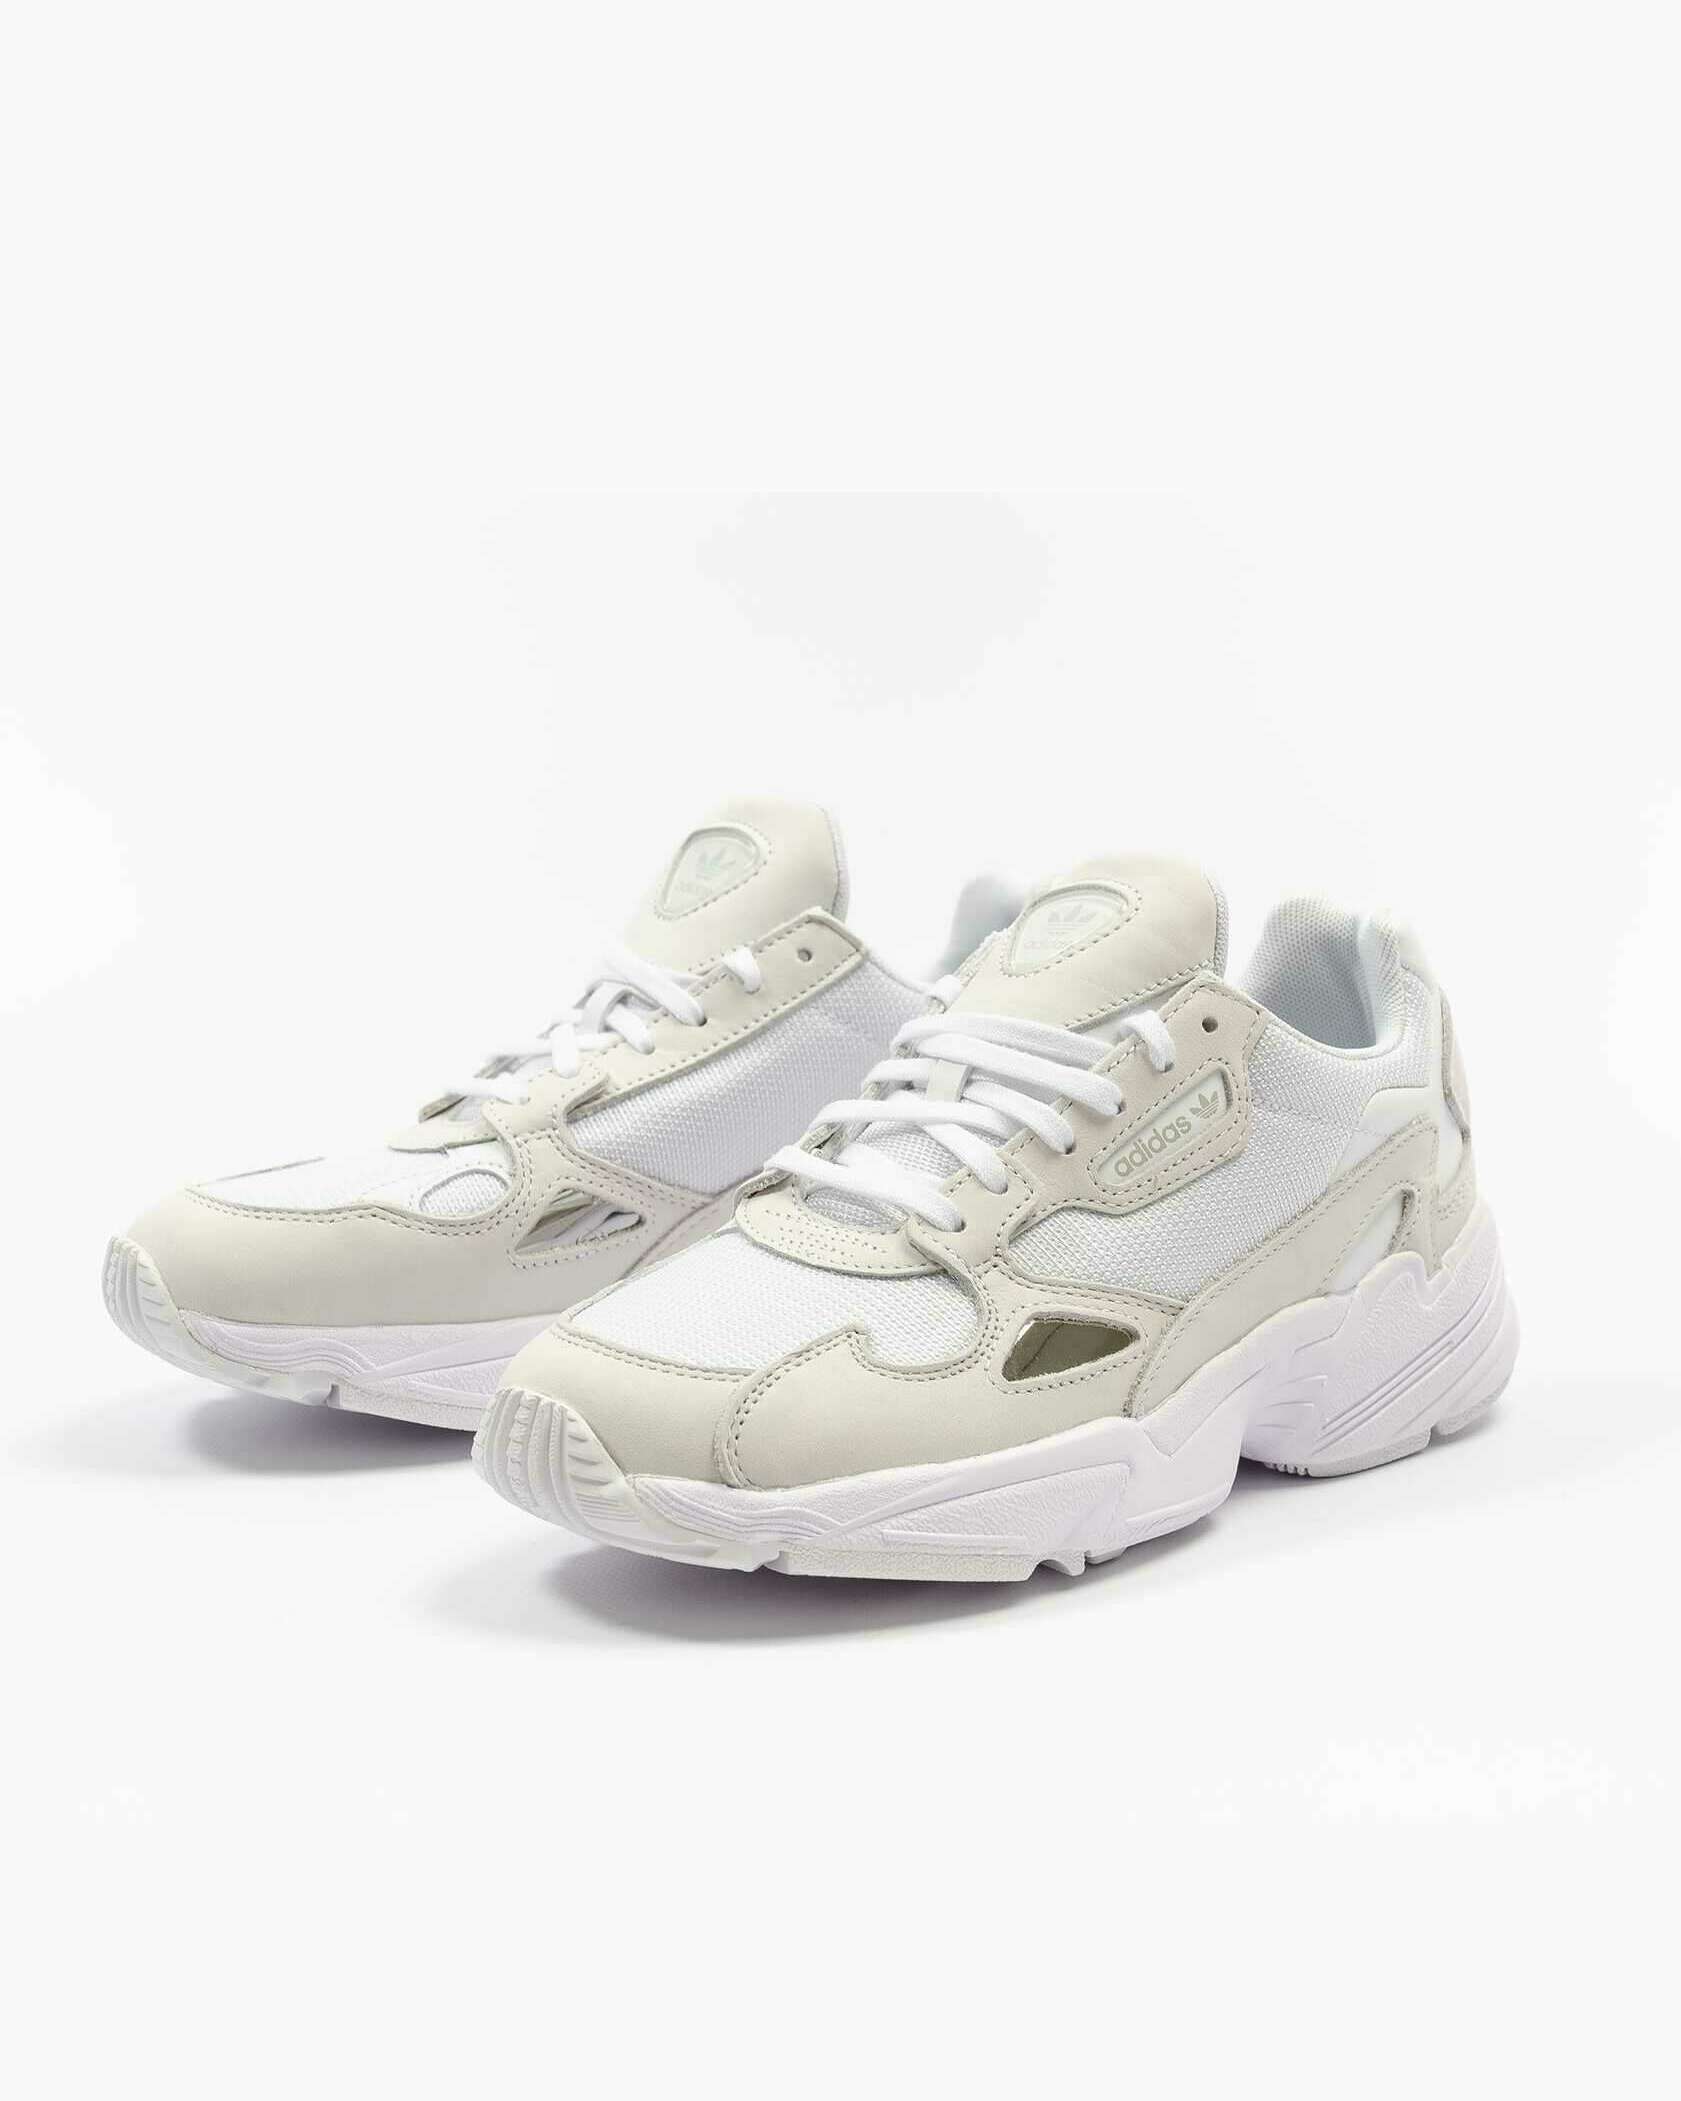 Susceptible to Identify Air conditioner adidas Falcon W White B28128| Buy Online at FOOTDISTRICT